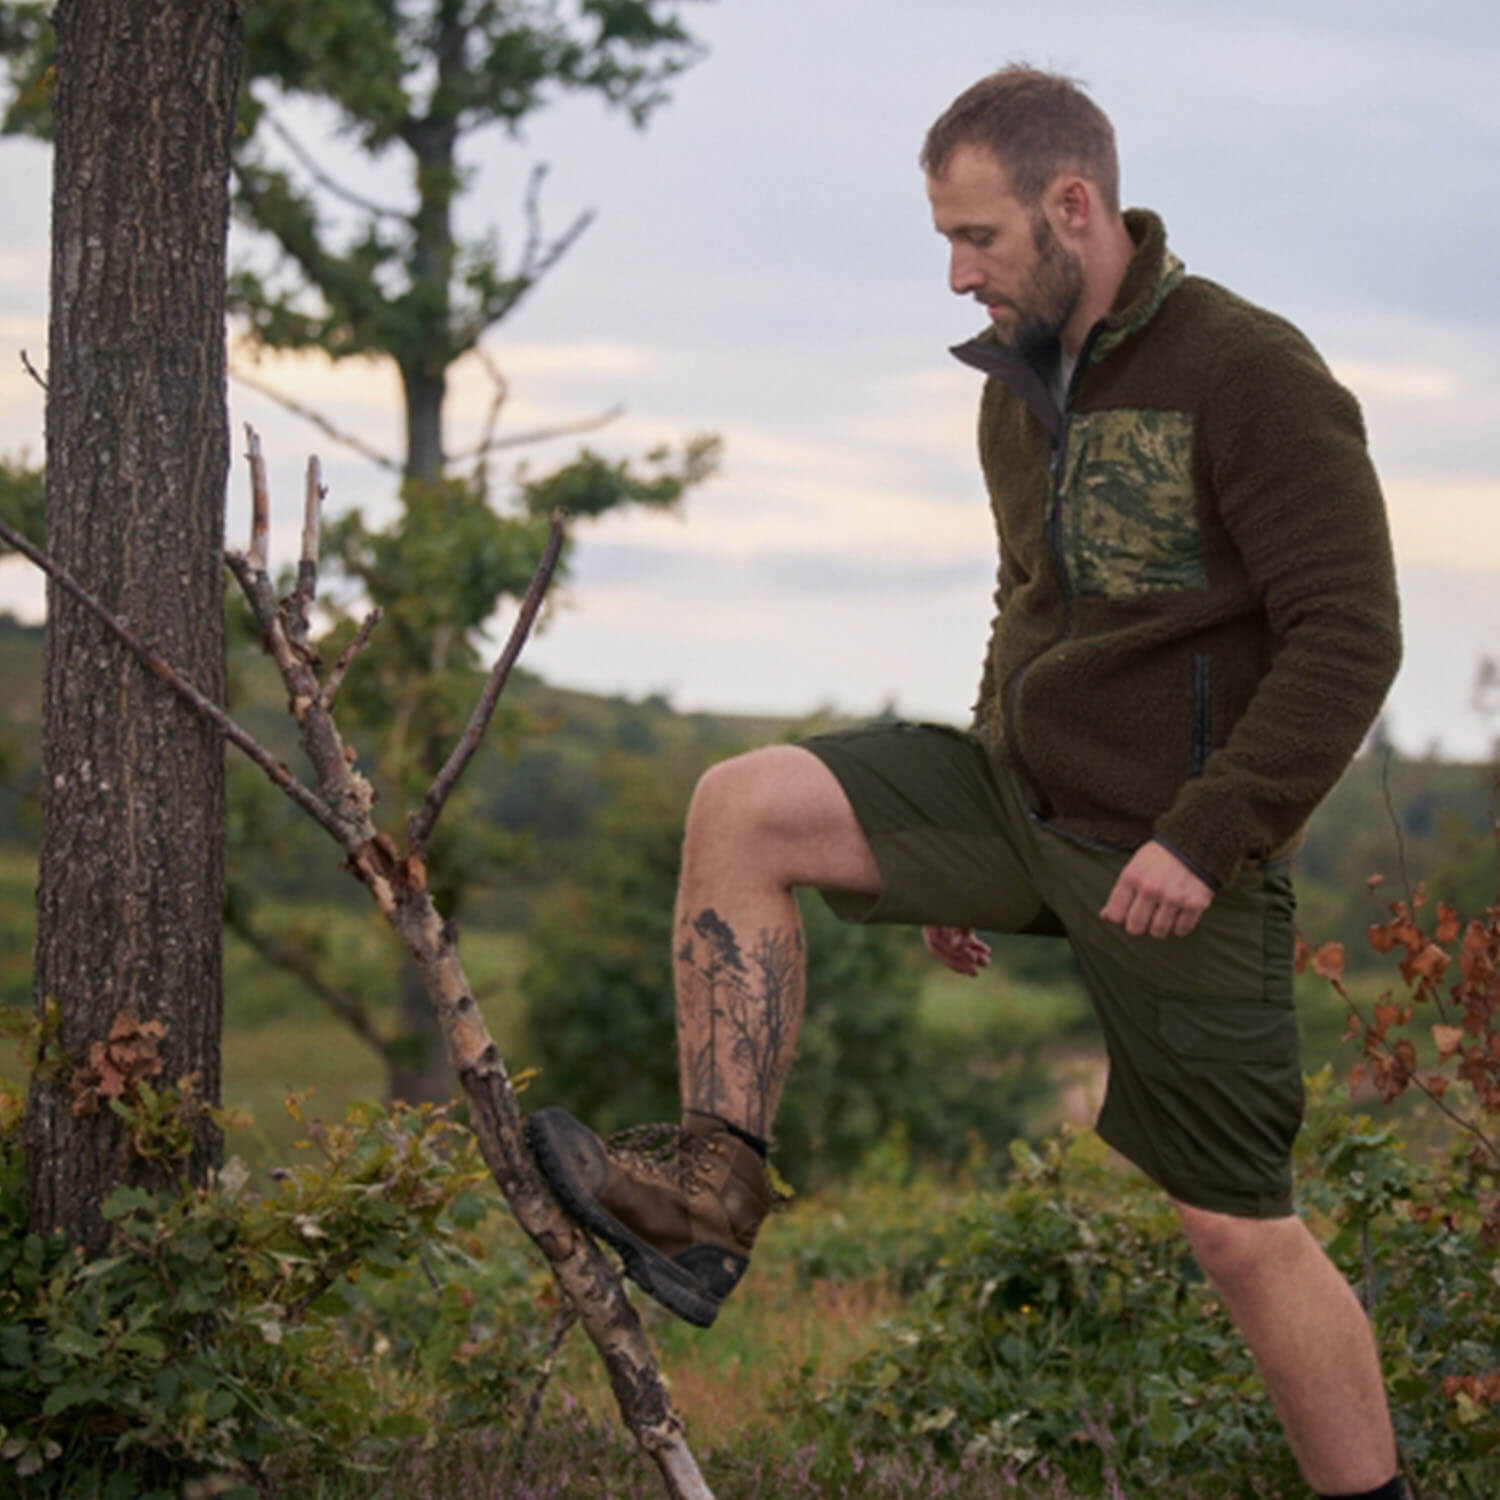 Seeland huntingshorts Elm (light pine/grizzly brown)